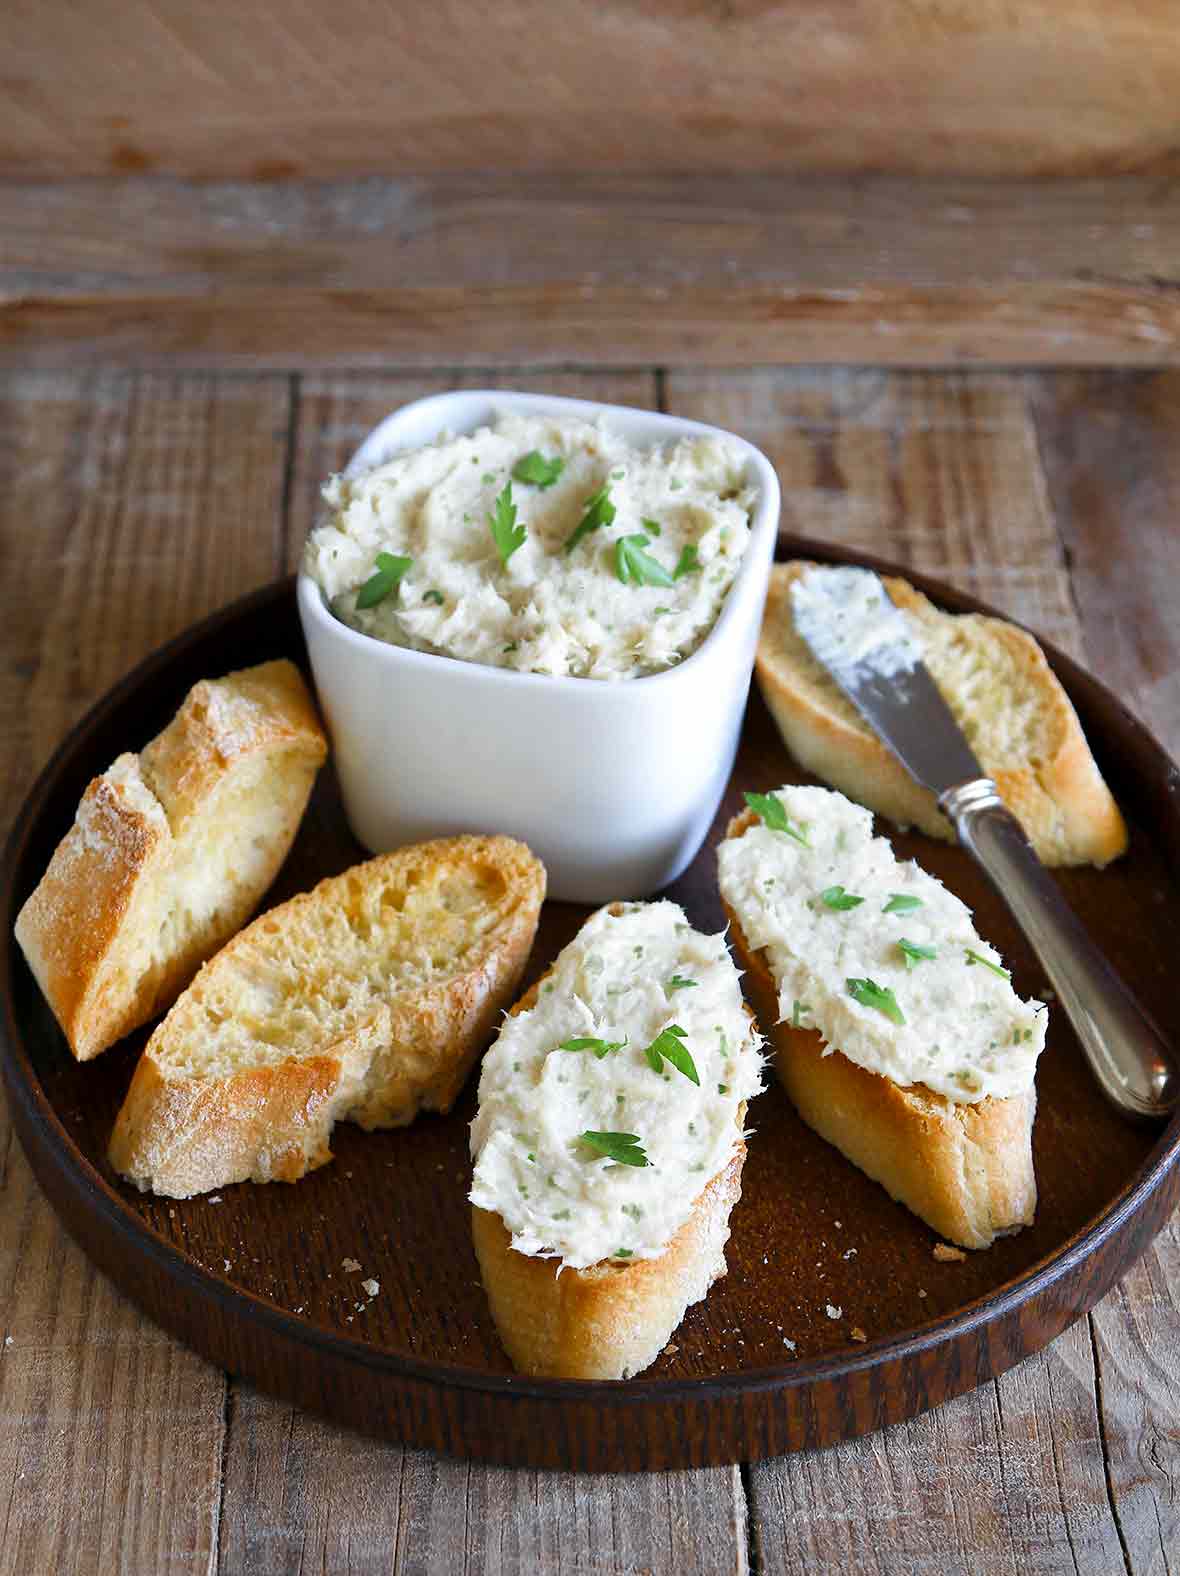 A plate with five baguette slices, a knife, and white bowl filled with fresh cod brandade, garnished with parsley.